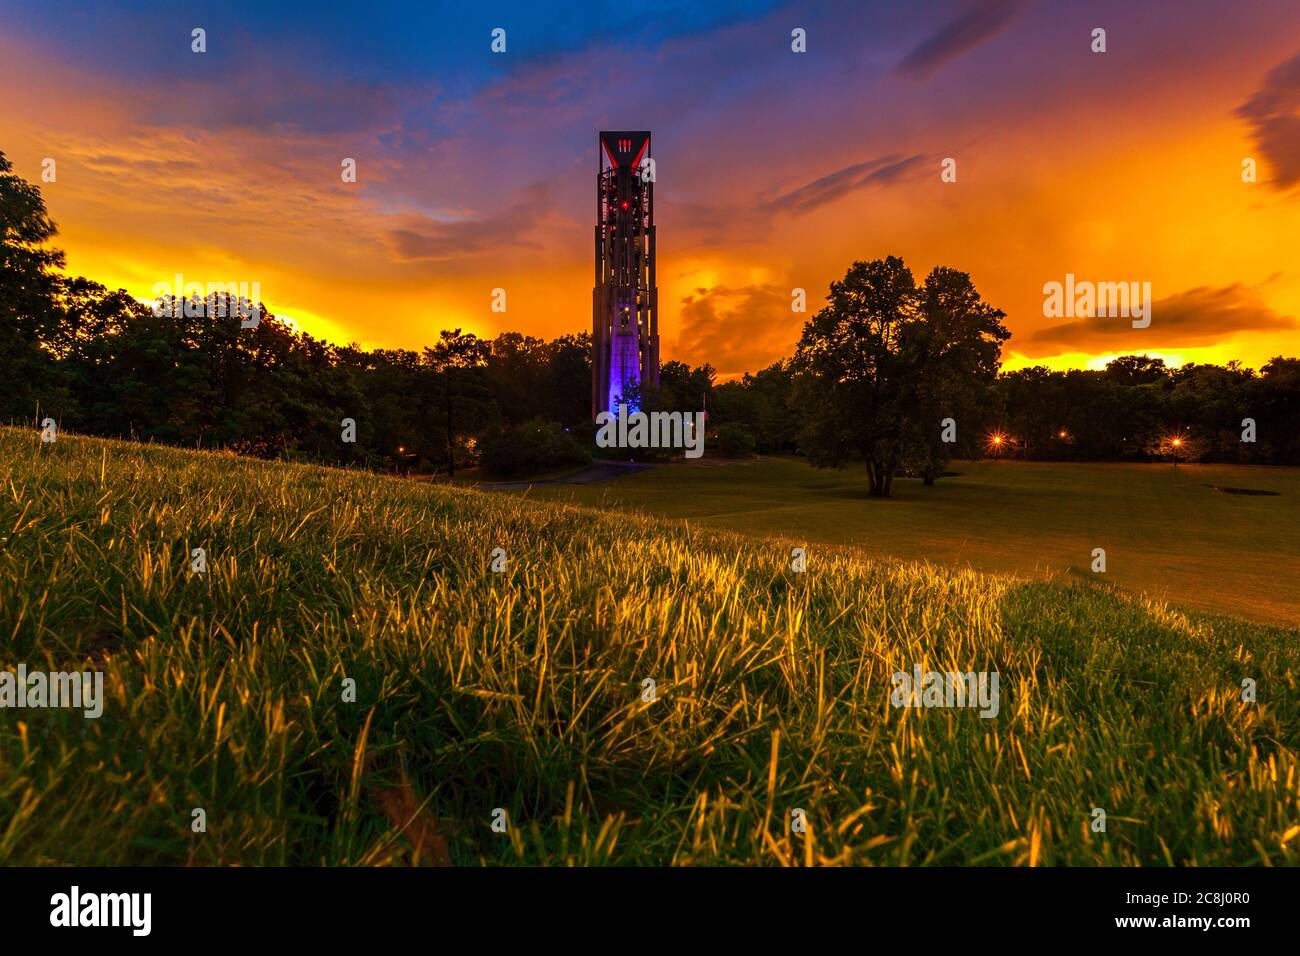 The Carillon bell tower in Naperville just after a storm at dusk Stock Photo